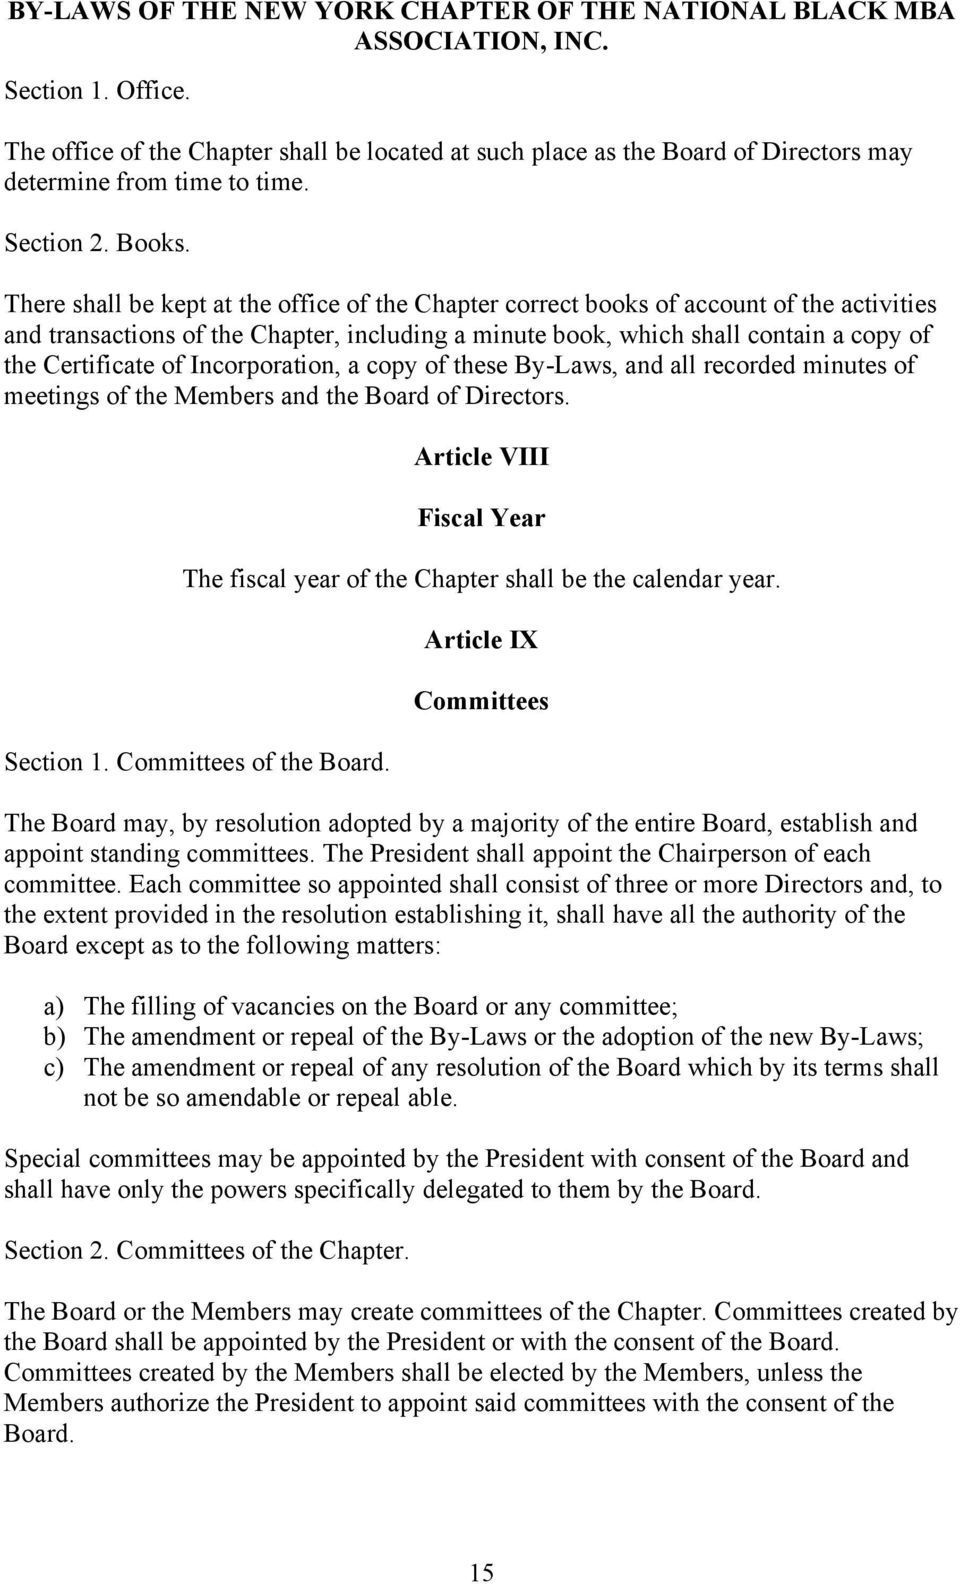 Incorporation, a copy of these By-Laws, and all recorded minutes of meetings of the Members and the Board of Directors.